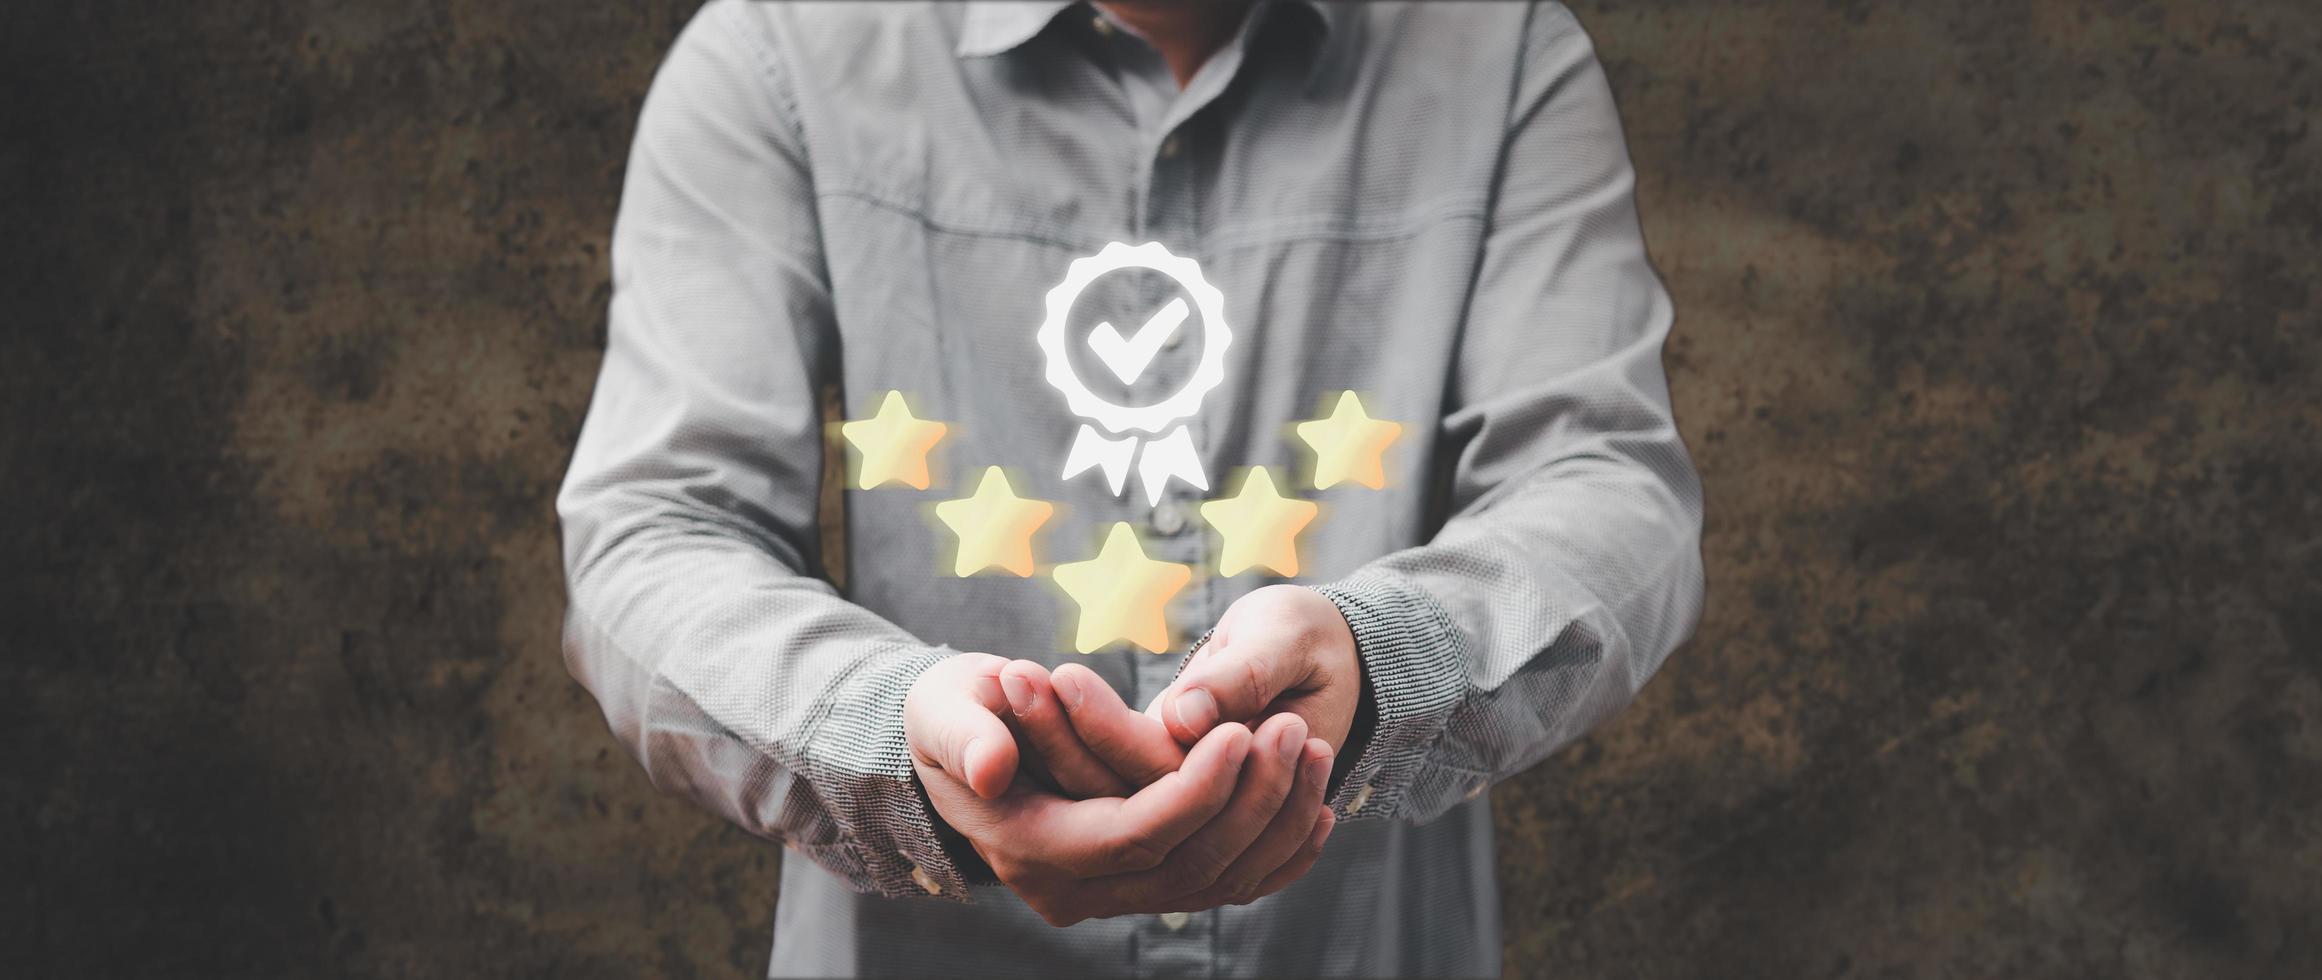 person's hand holding and show the sign of the top service  best quality assurance golden five star, ISO certification, Standards, Guarantee, and standardization concept photo